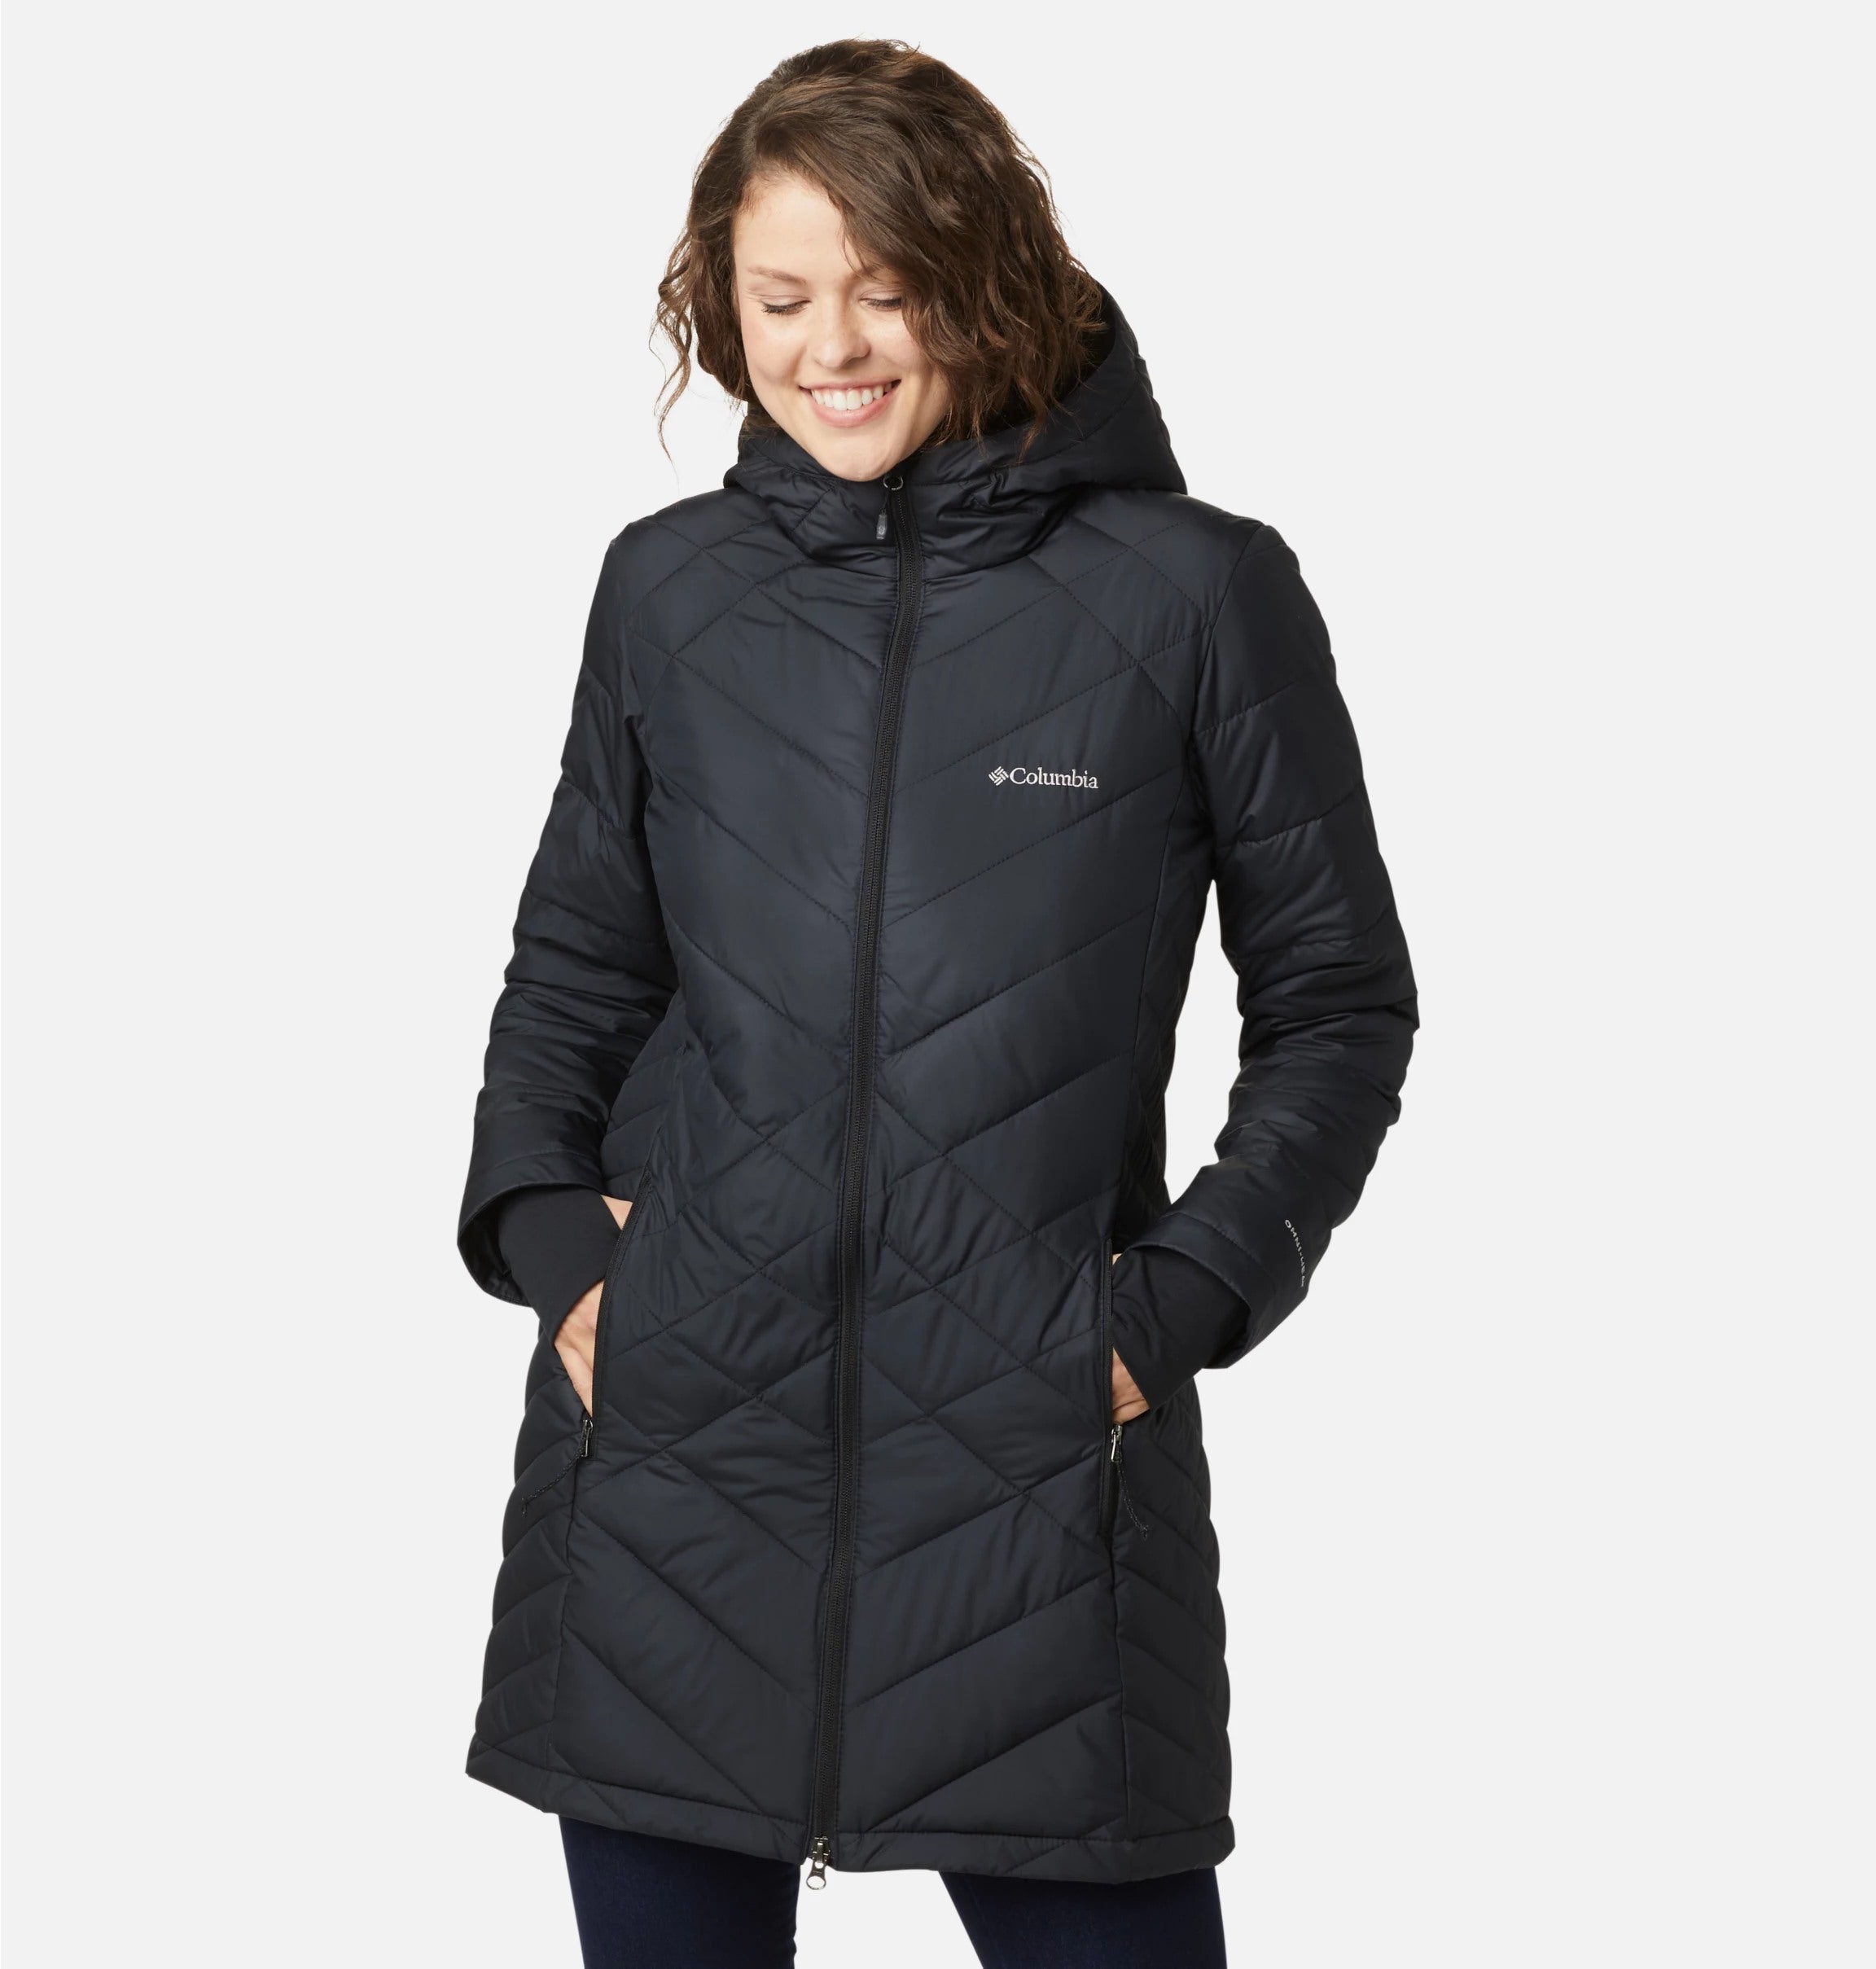 Women's Equestrian Outerwear - Athletic Outerwear - Equiline